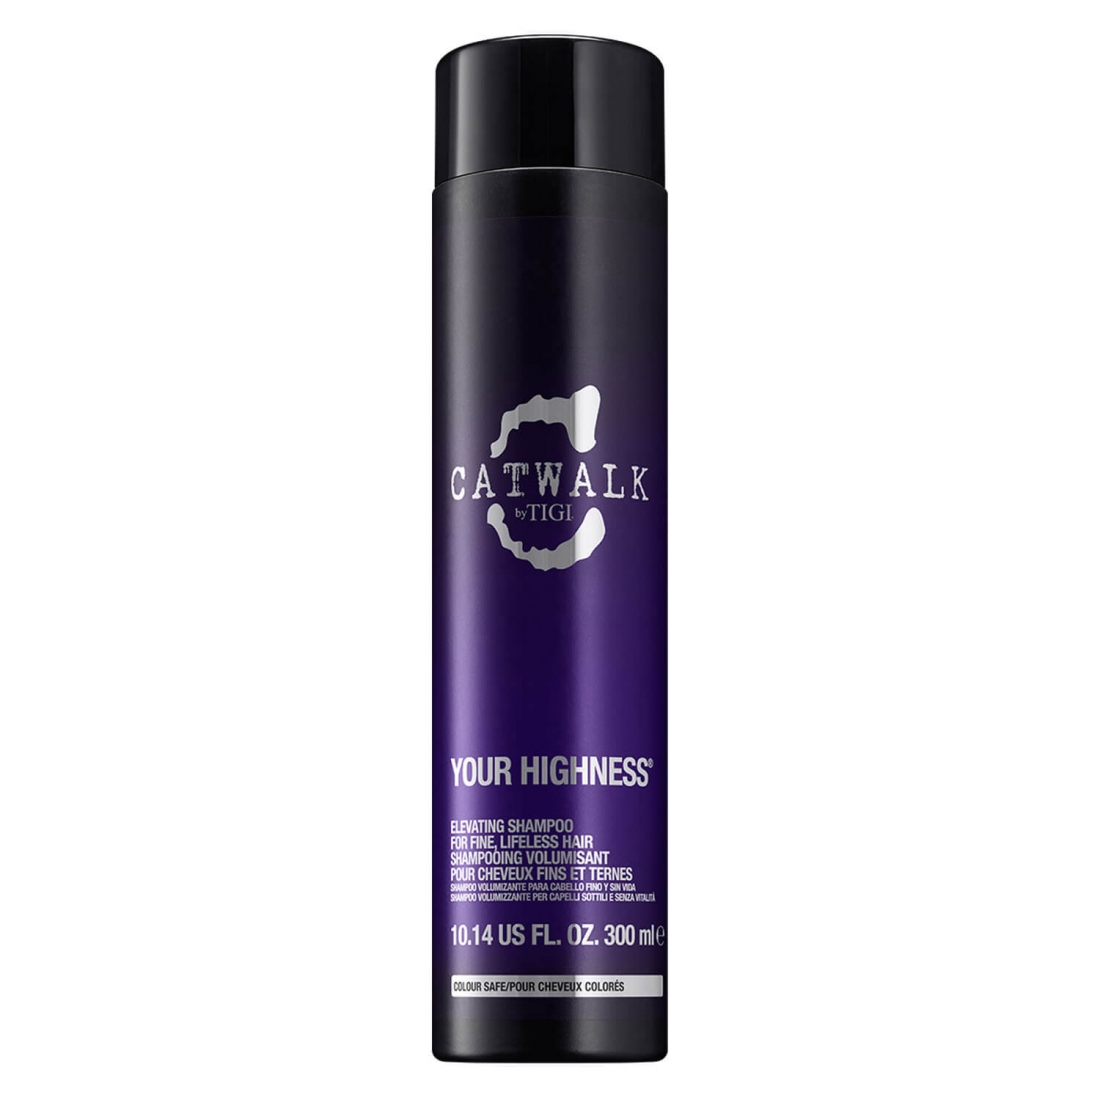 'Your Highness Elevating' Shampoo - 300 ml